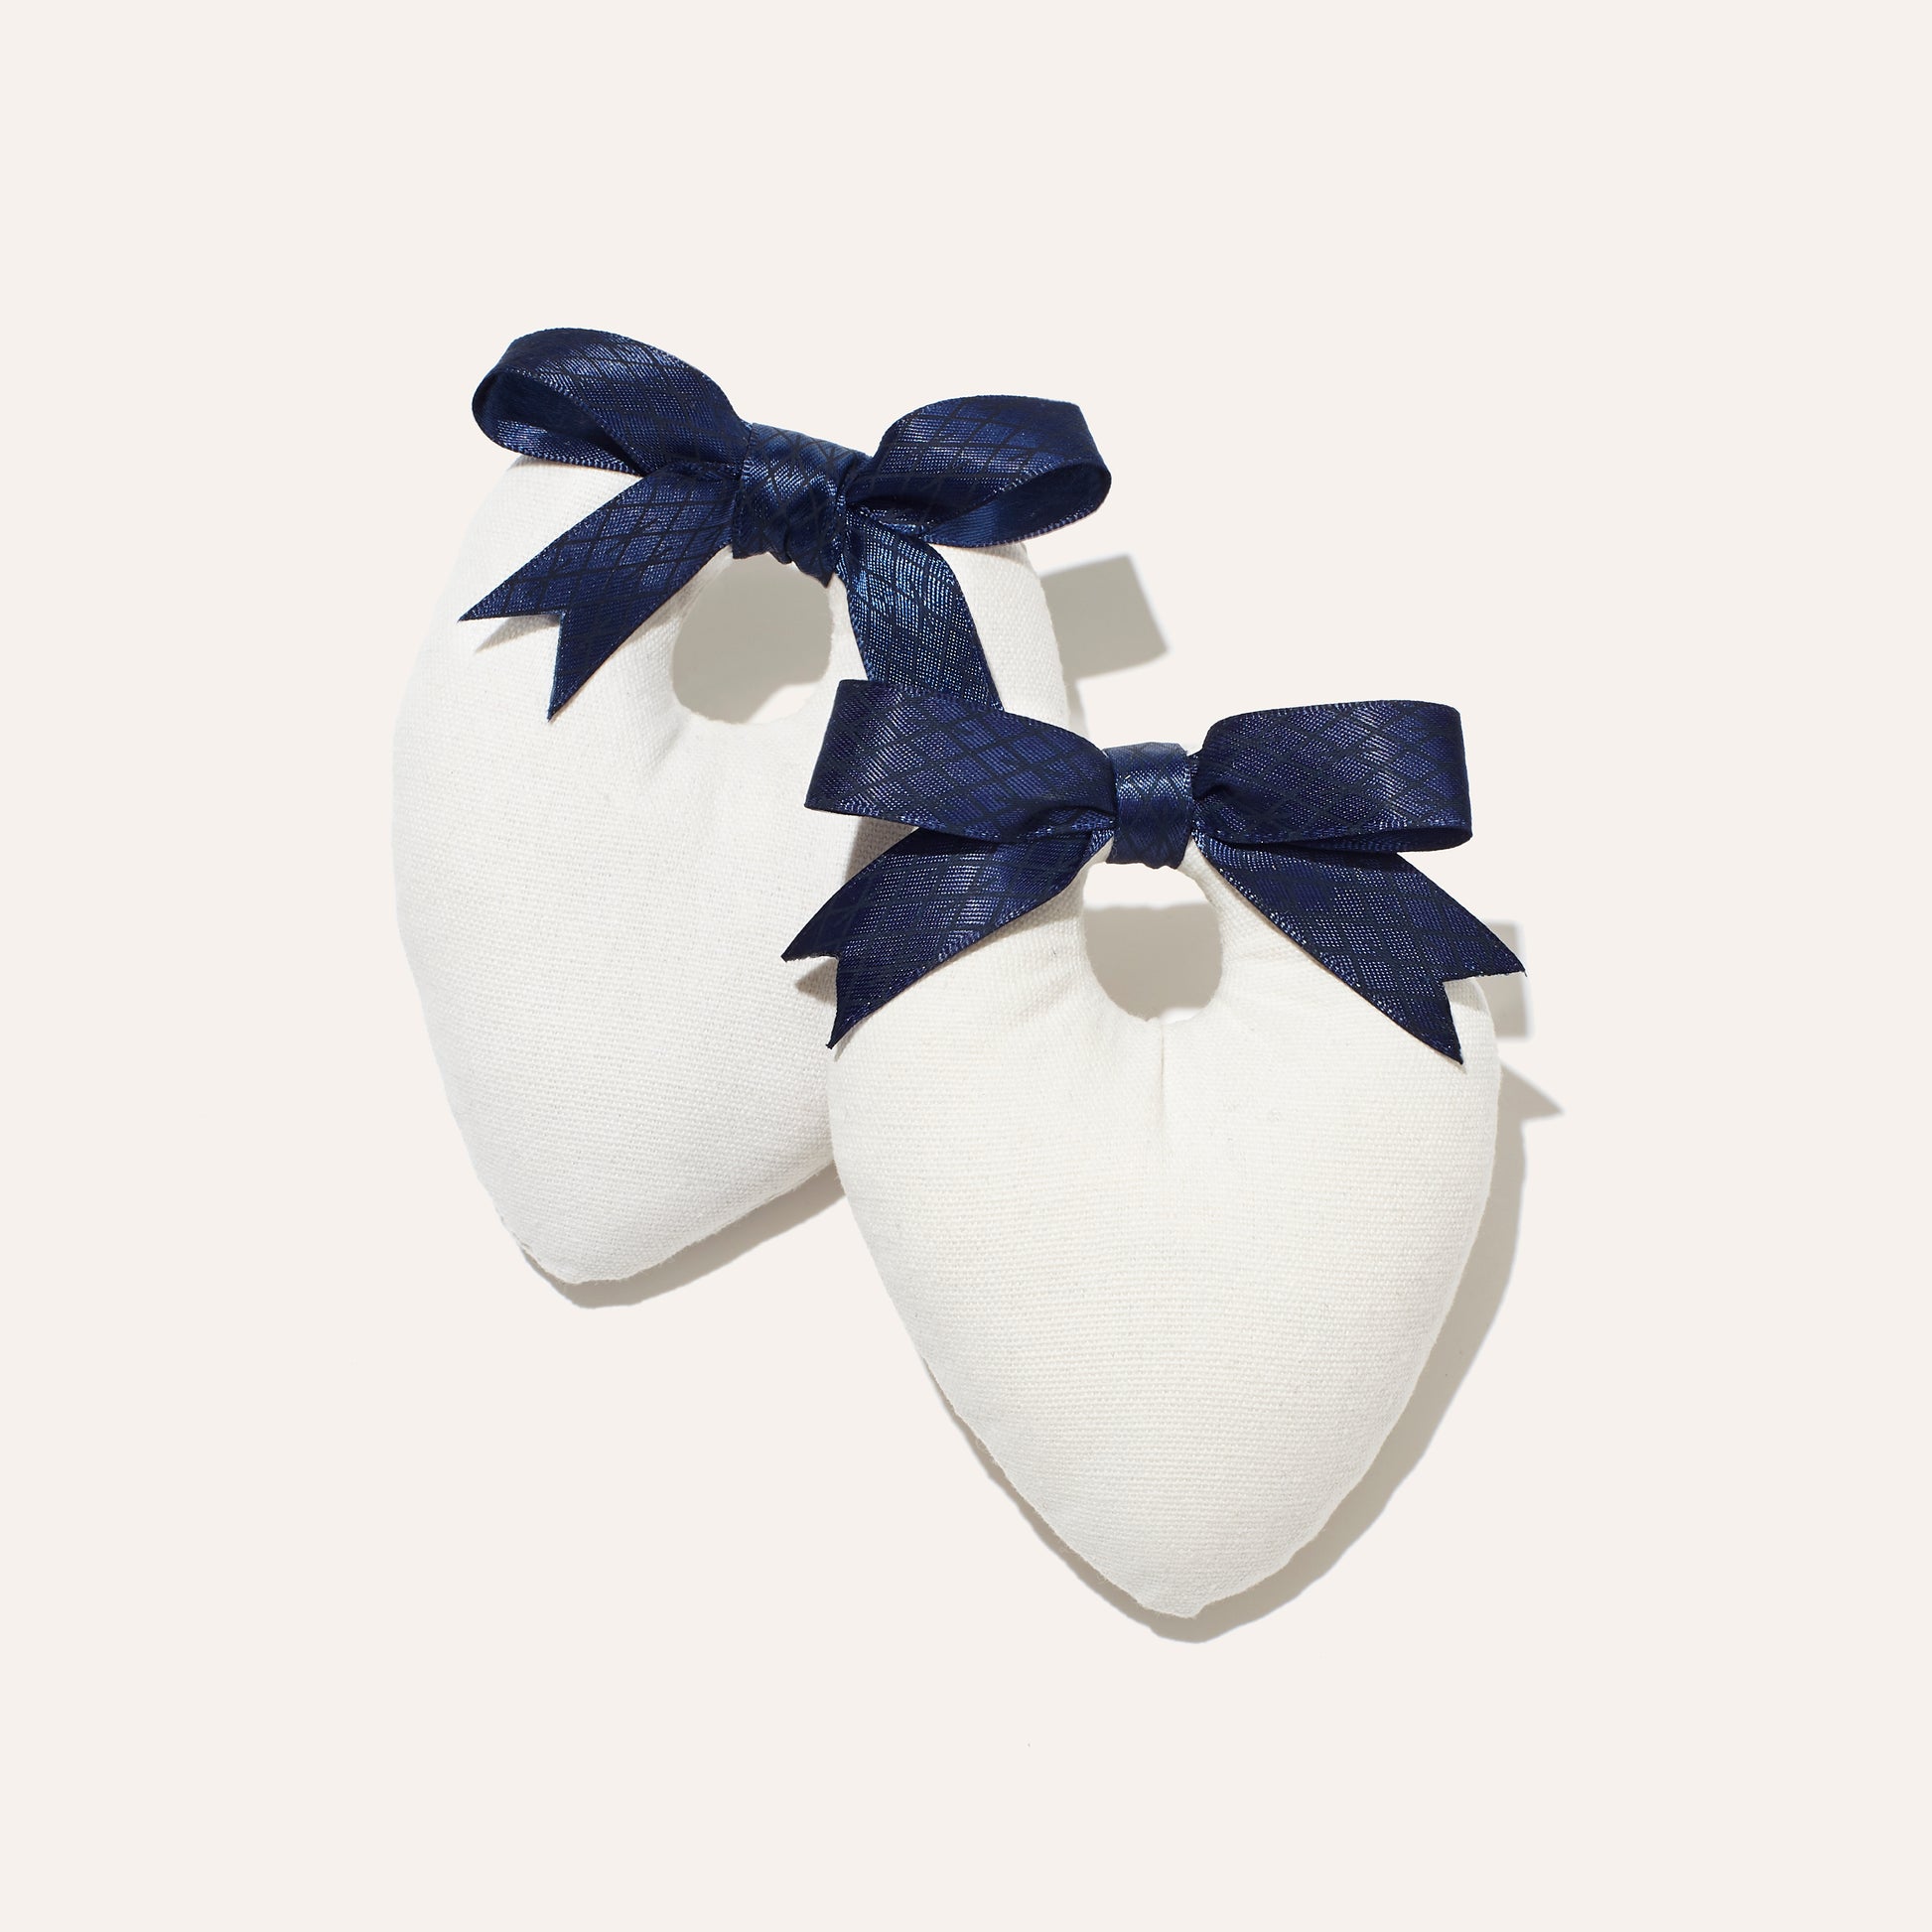 Canvas shoe shapers with navy satin bow for shoe storage and travel